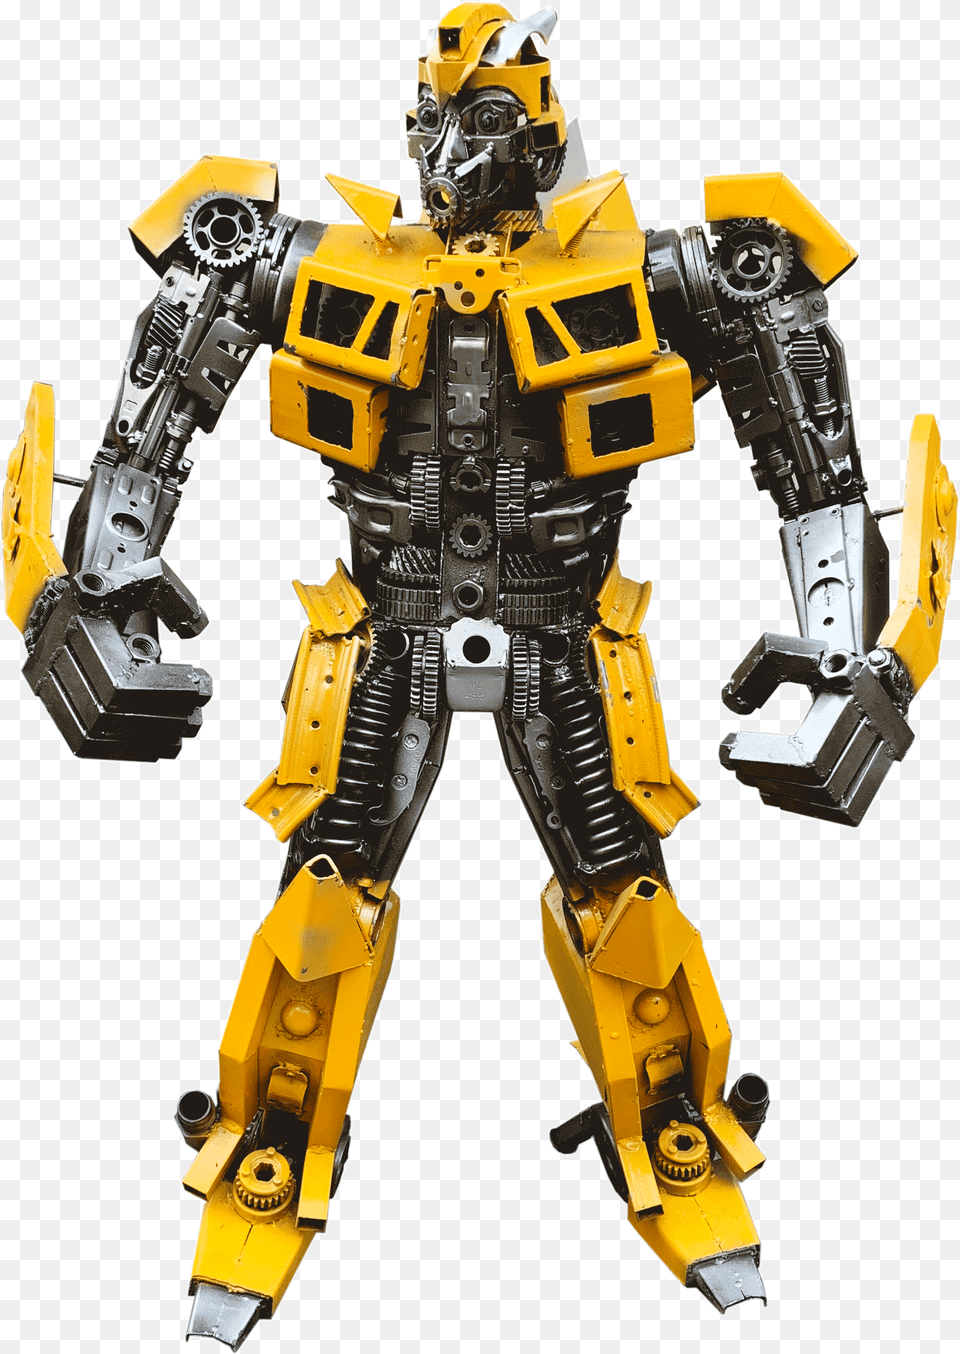 Bumblebee Military Robot, Animal, Toy, Invertebrate, Insect Png Image